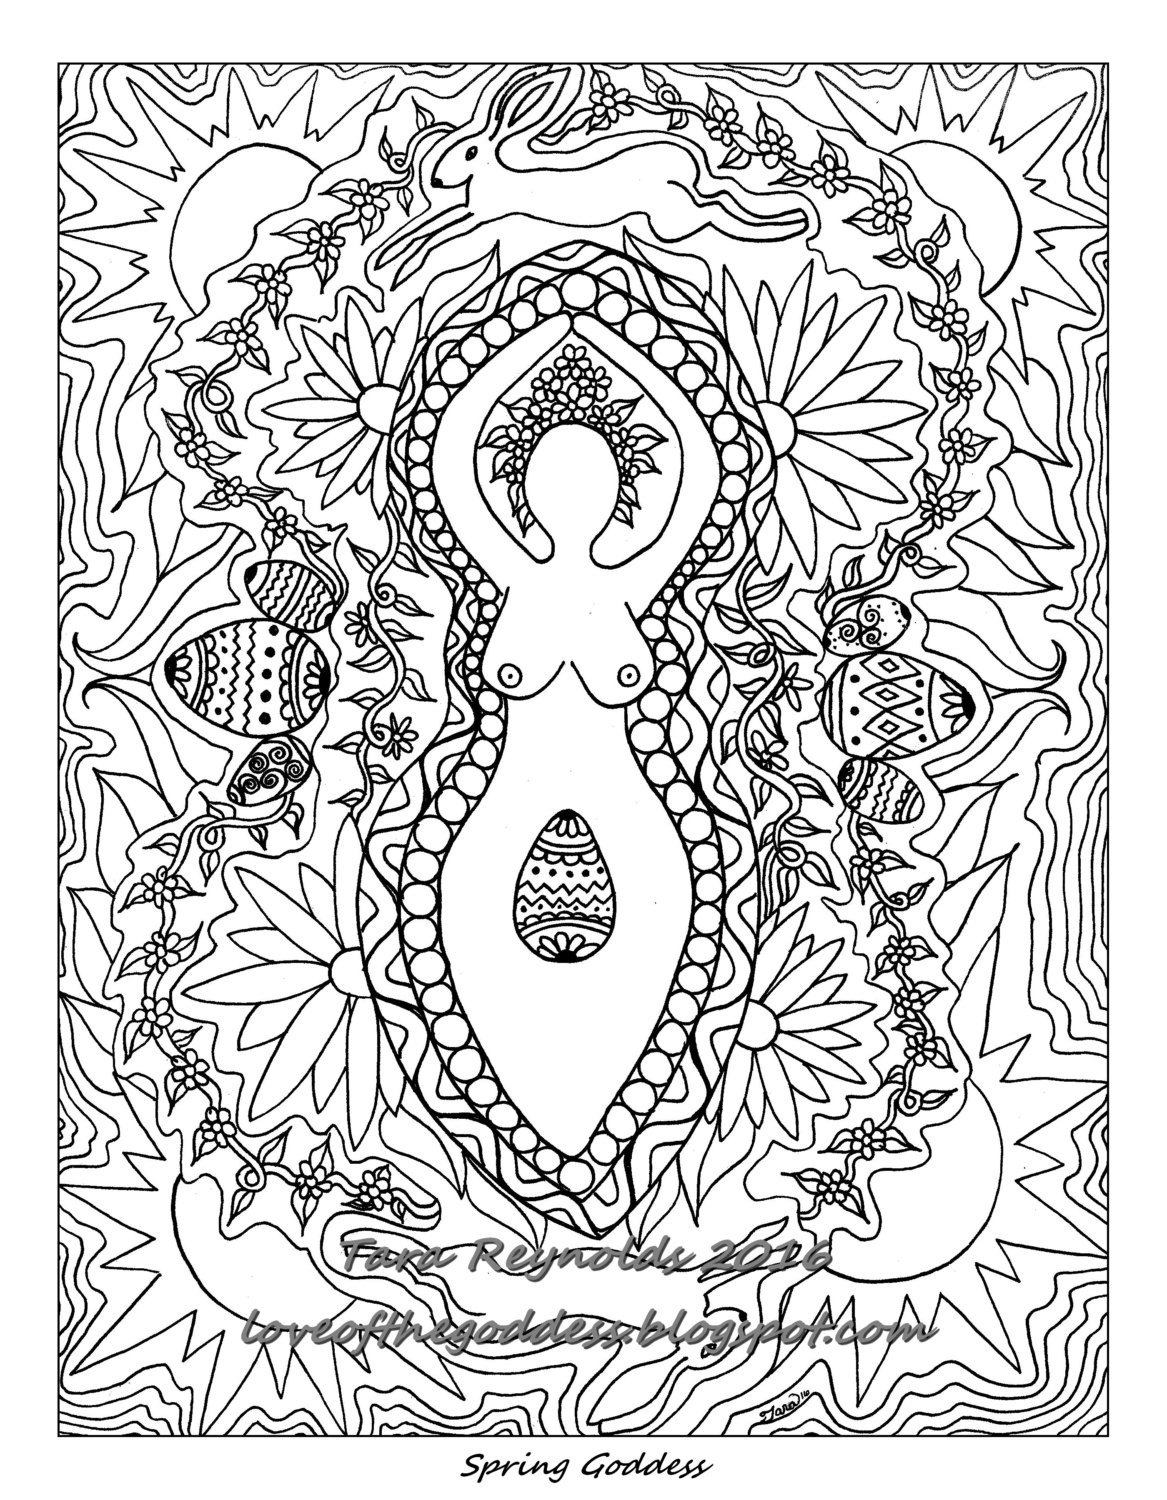 Printable Wiccan Coloring Pages
 Wiccan Coloring Pages at GetDrawings